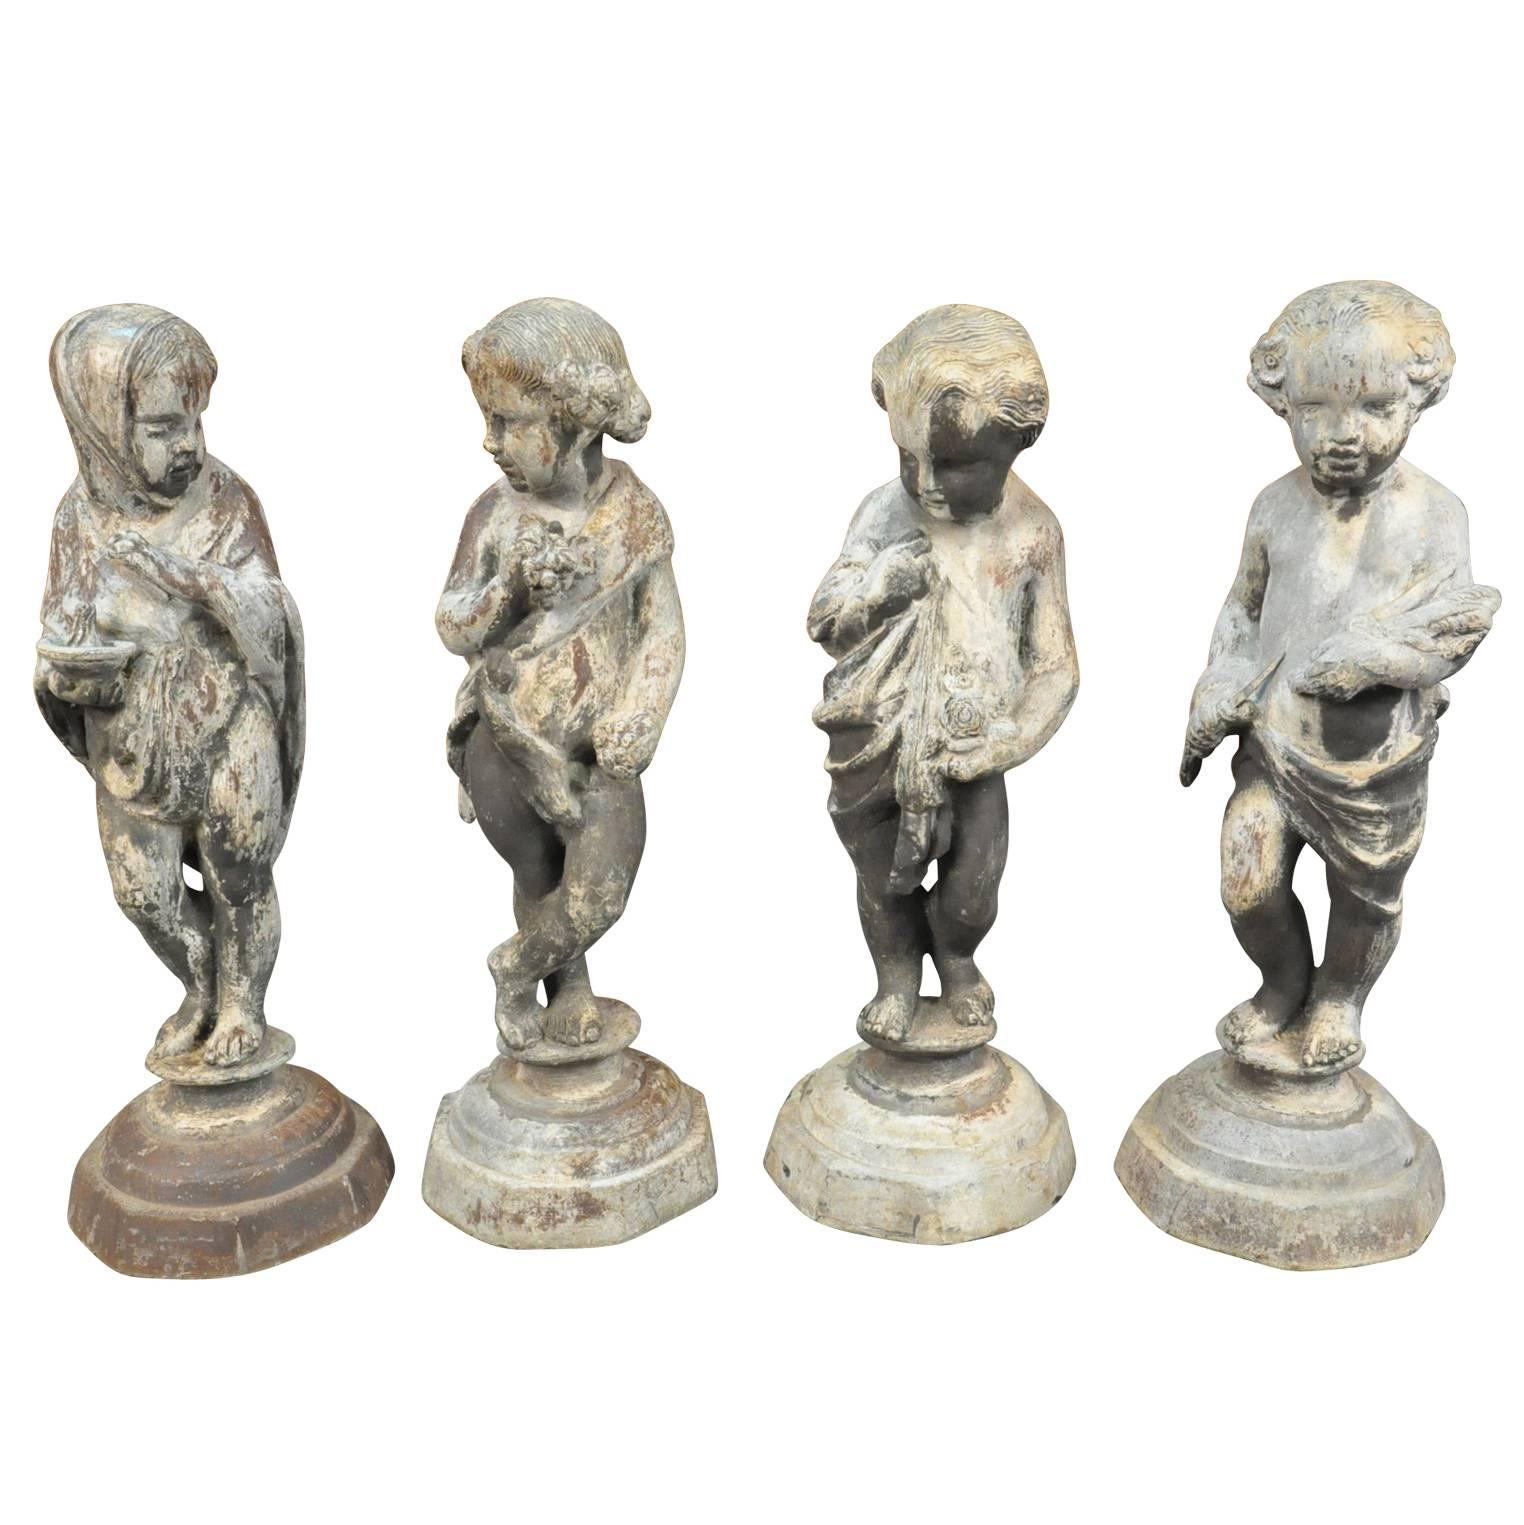 Outstanding Set of Four Lead Statues, The Four Seasons